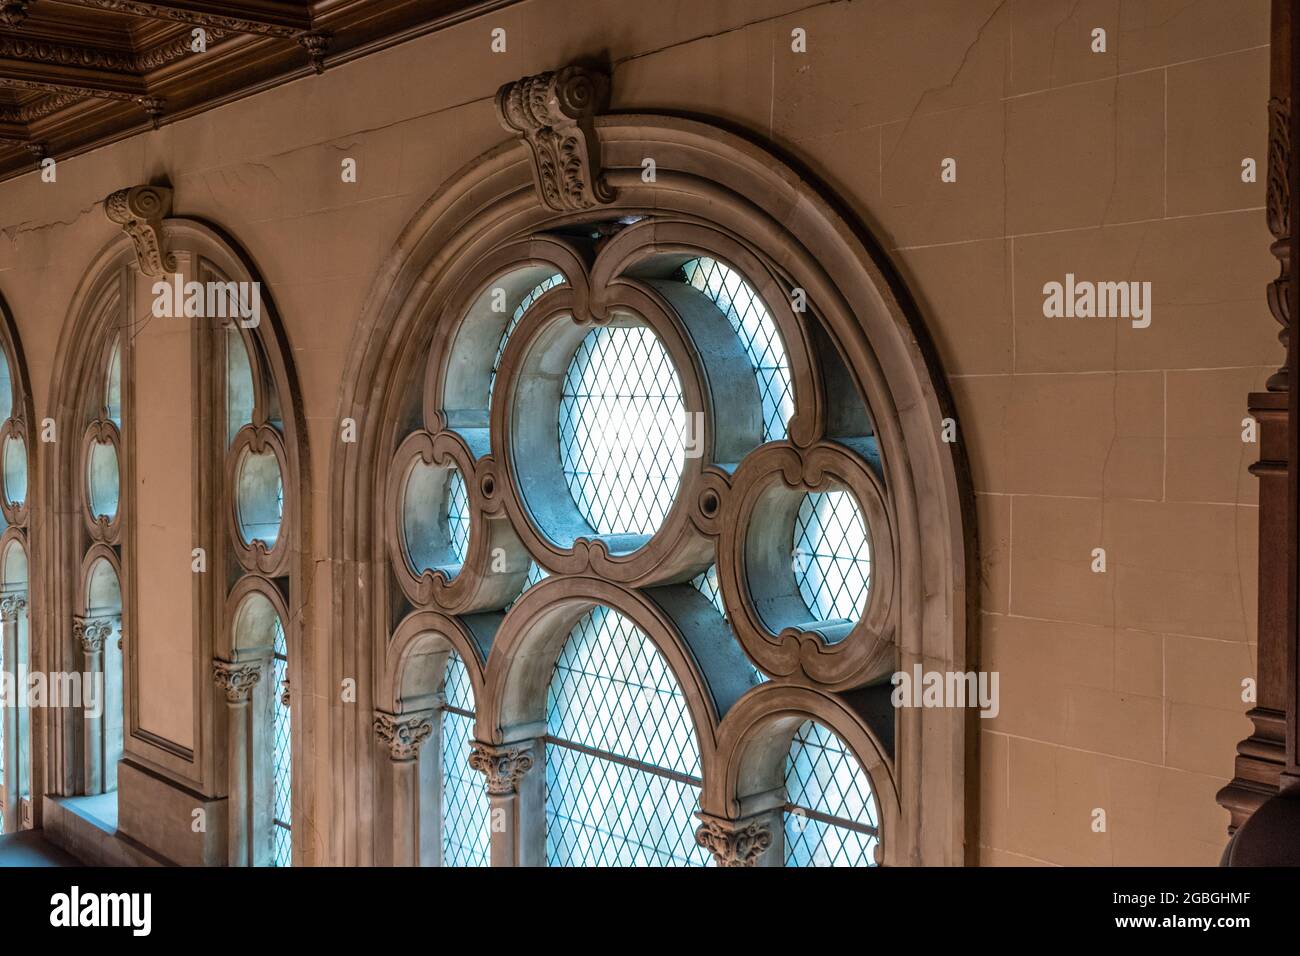 Window detail at the Museum of Decorative Arts in Buenos Aires, Argentina Stock Photo